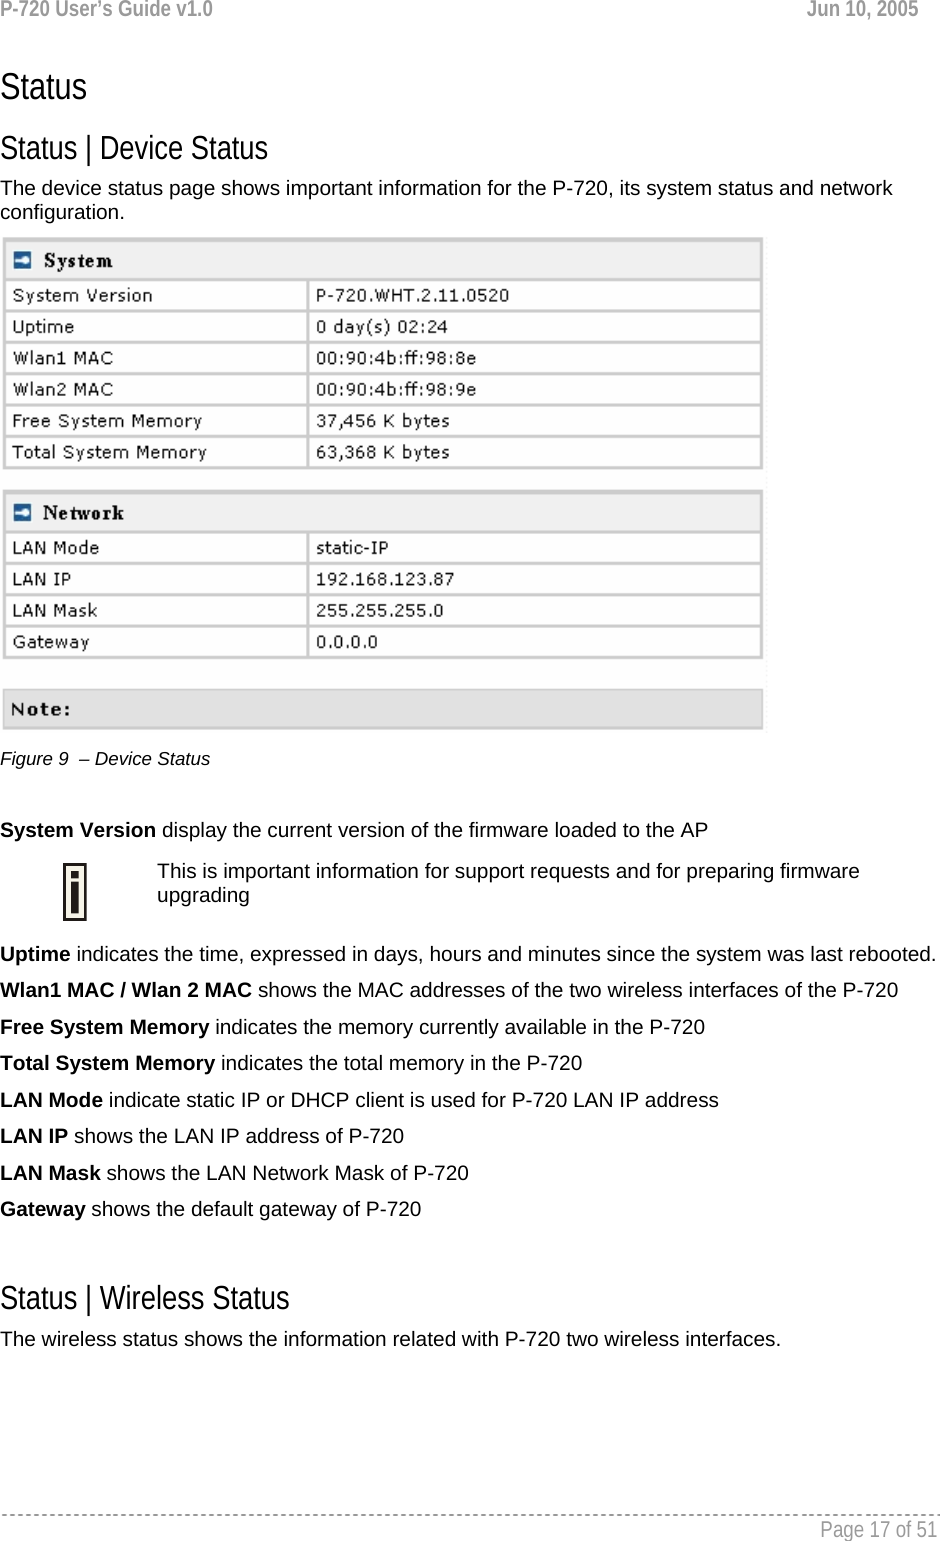 P-720 User’s Guide v1.0  Jun 10, 2005     Page 17 of 51   Status Status | Device Status The device status page shows important information for the P-720, its system status and network configuration.  Figure 9  – Device Status  System Version display the current version of the firmware loaded to the AP  This is important information for support requests and for preparing firmware upgrading Uptime indicates the time, expressed in days, hours and minutes since the system was last rebooted. Wlan1 MAC / Wlan 2 MAC shows the MAC addresses of the two wireless interfaces of the P-720 Free System Memory indicates the memory currently available in the P-720  Total System Memory indicates the total memory in the P-720  LAN Mode indicate static IP or DHCP client is used for P-720 LAN IP address LAN IP shows the LAN IP address of P-720 LAN Mask shows the LAN Network Mask of P-720 Gateway shows the default gateway of P-720  Status | Wireless Status The wireless status shows the information related with P-720 two wireless interfaces. 